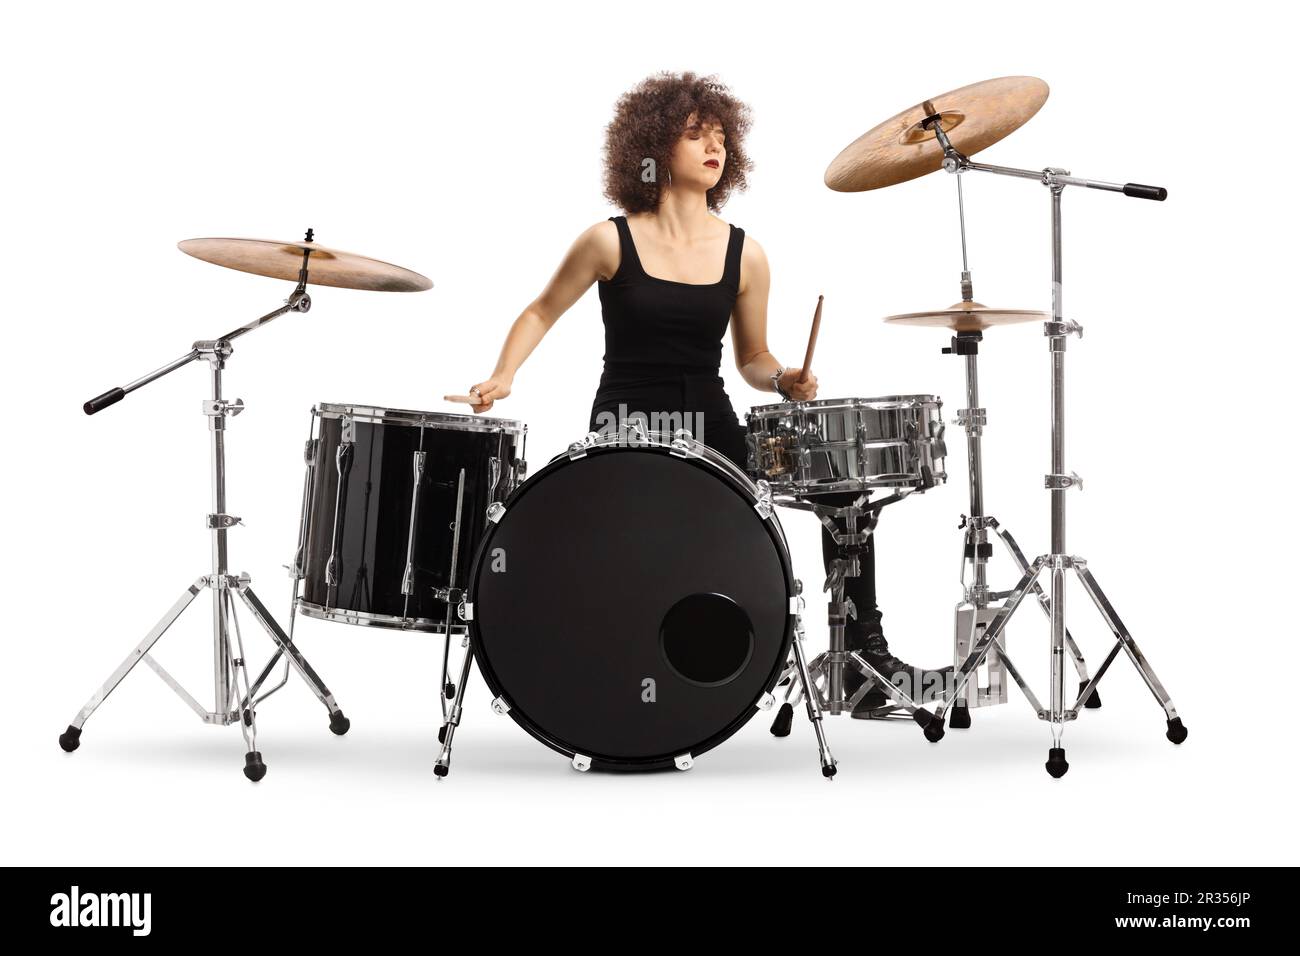 Female drummer performing isolated on white background Stock Photo